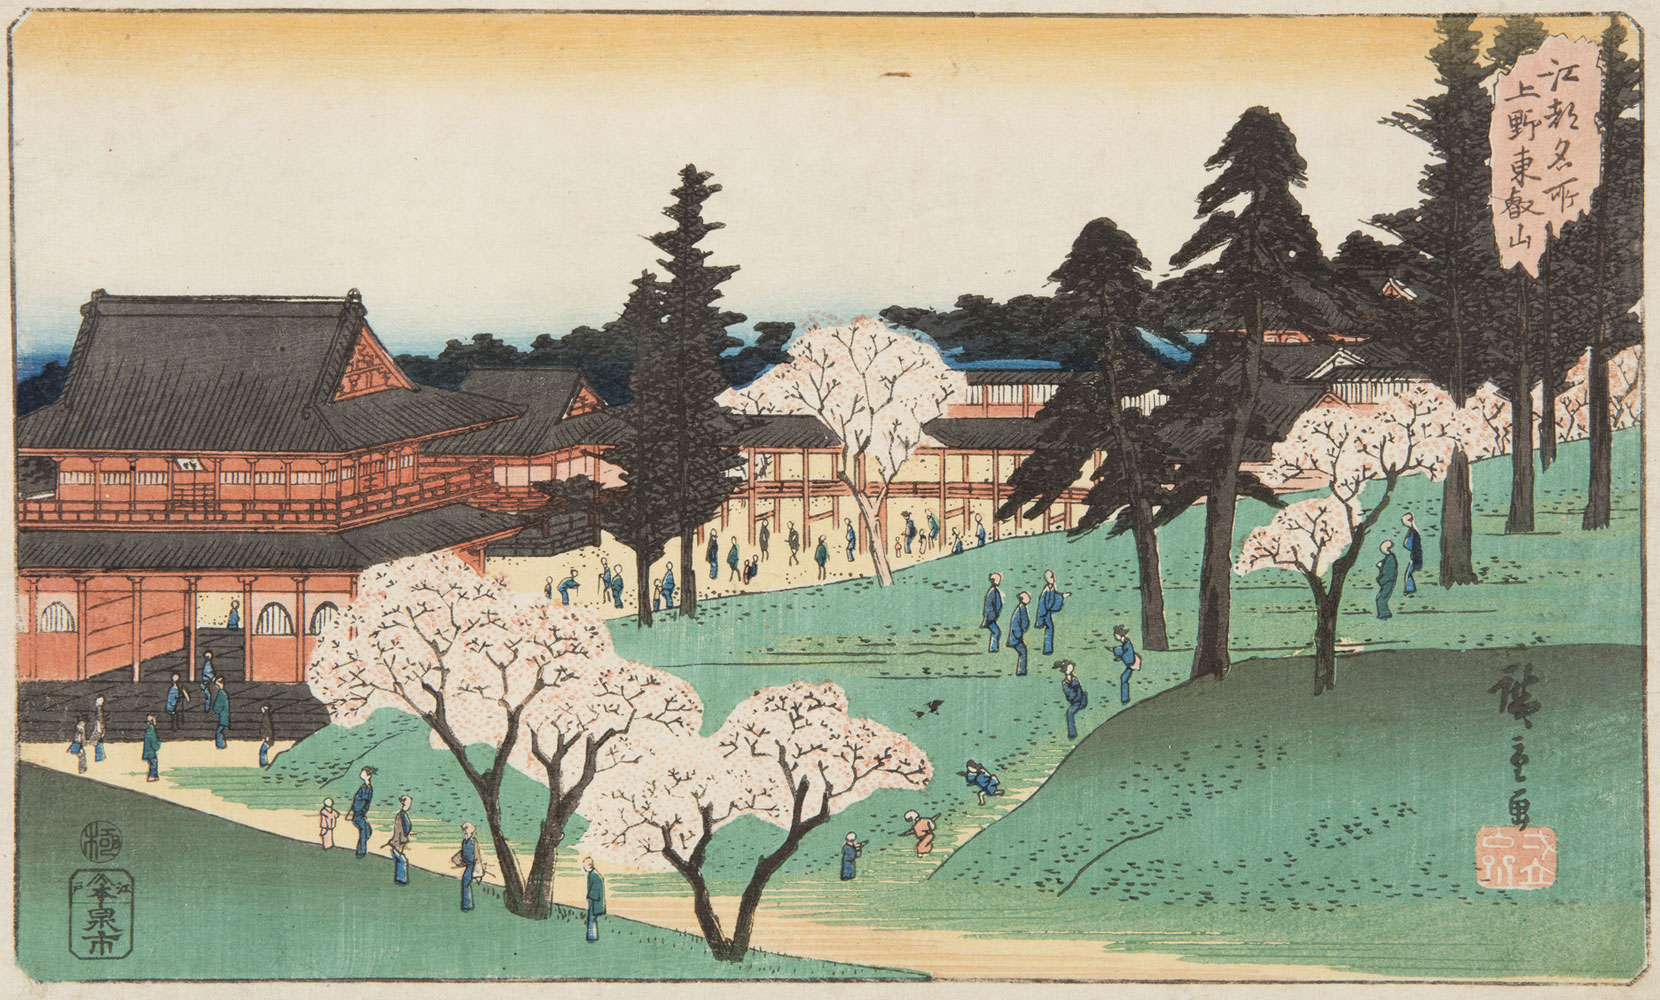 Japanese print showing a large Japanese temple with many small figures dressed in traditional costume walking in the grounds.